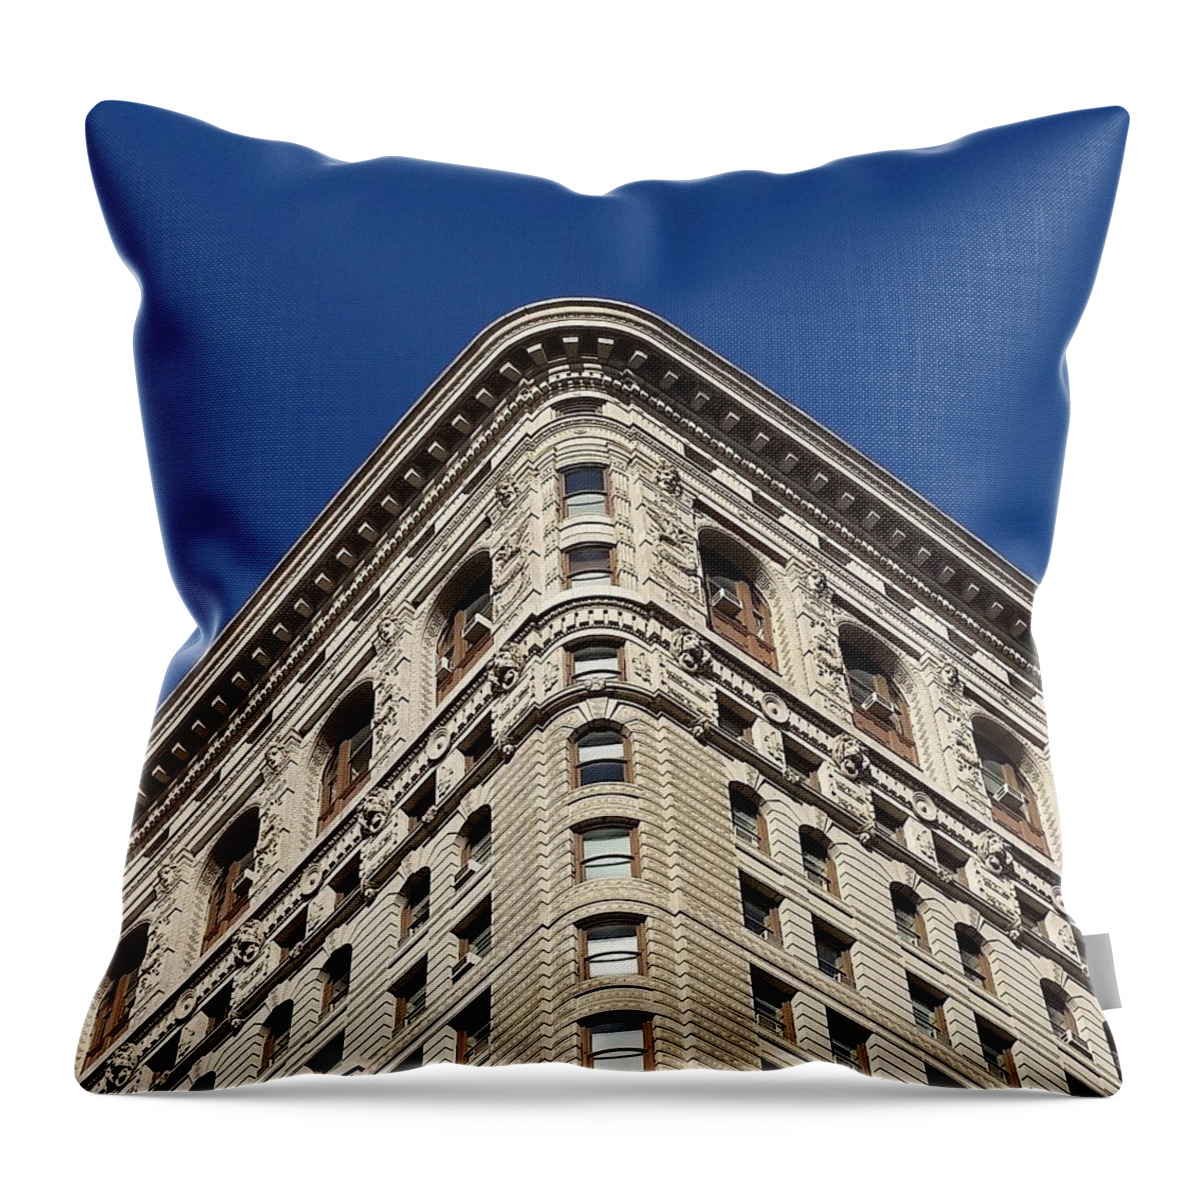 Flatiron Building Throw Pillow featuring the photograph FlatIron Building Corner by Vic Ritchey